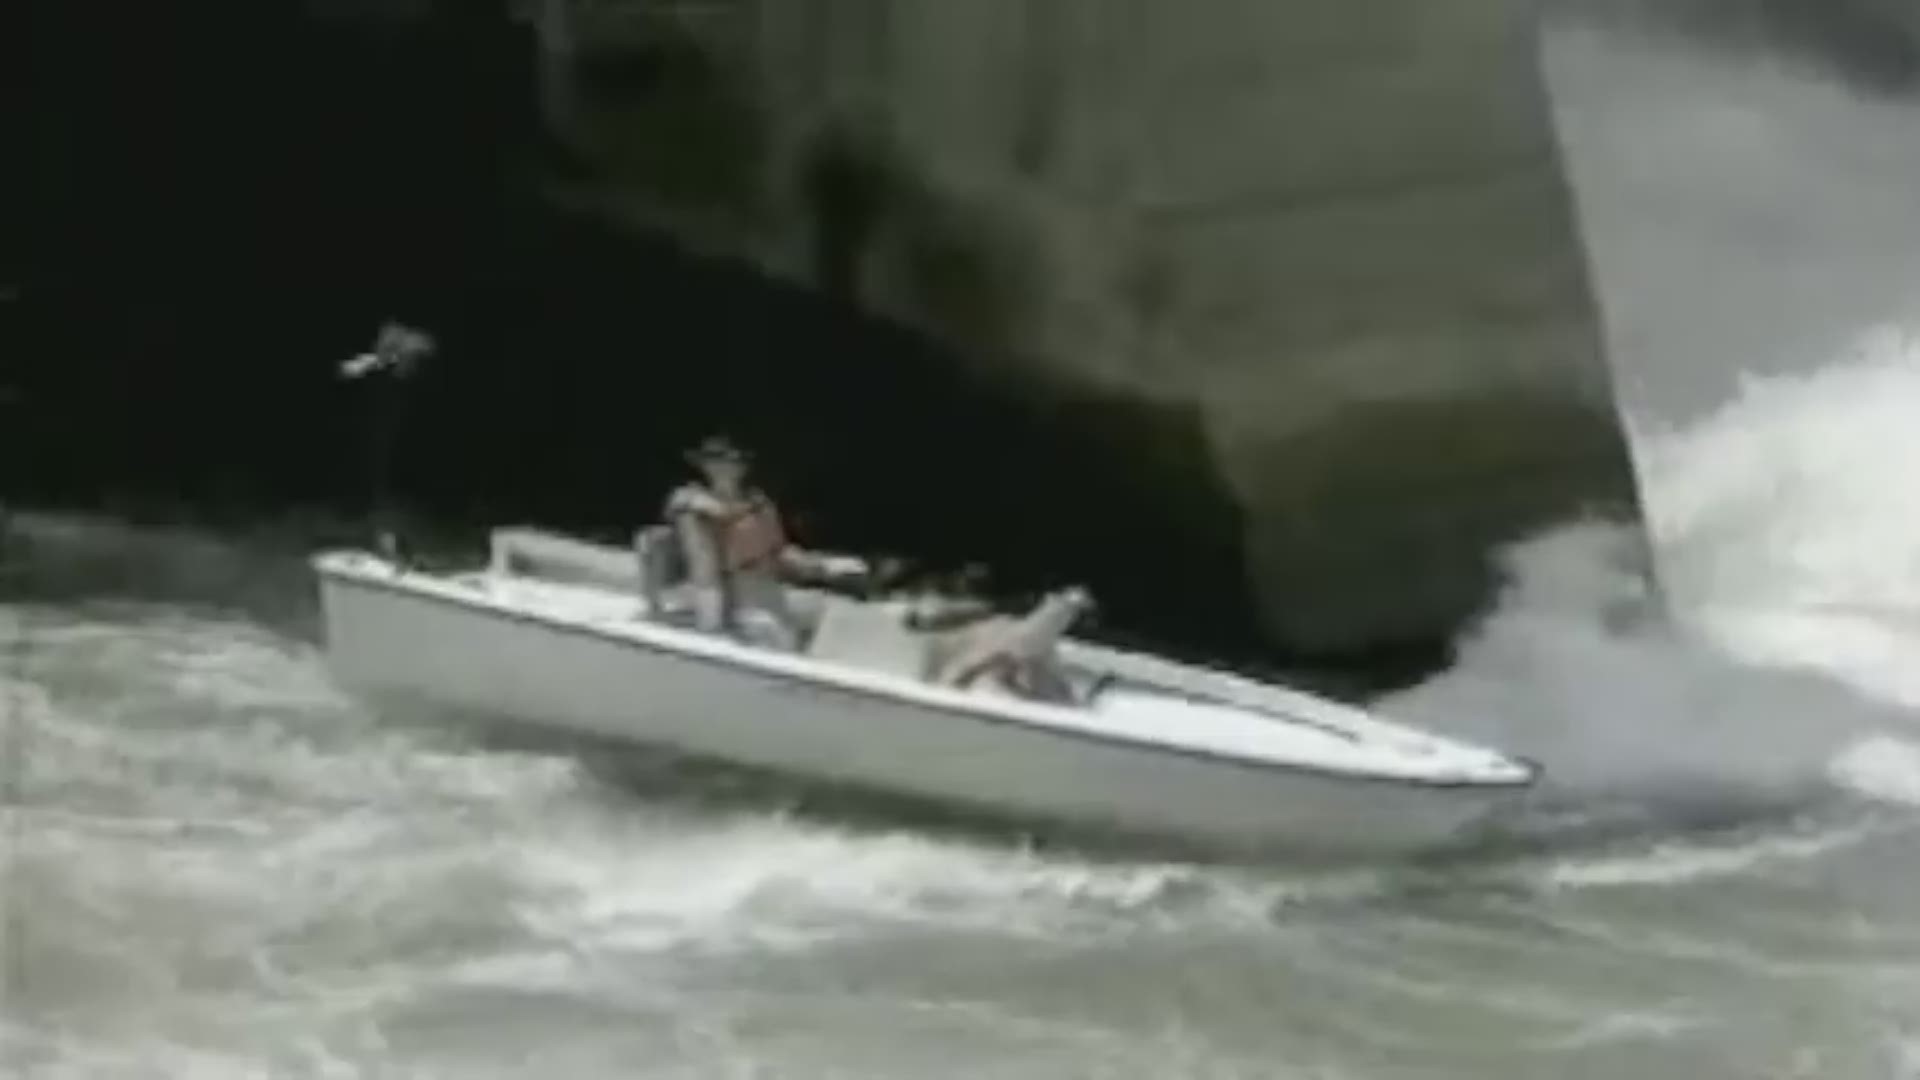 "In light of increasing serious injury and fatal incidents below hydroelectric dams, we pulled this video from our boating education course to show boaters just how treacherous spillways can be," TWRA said.